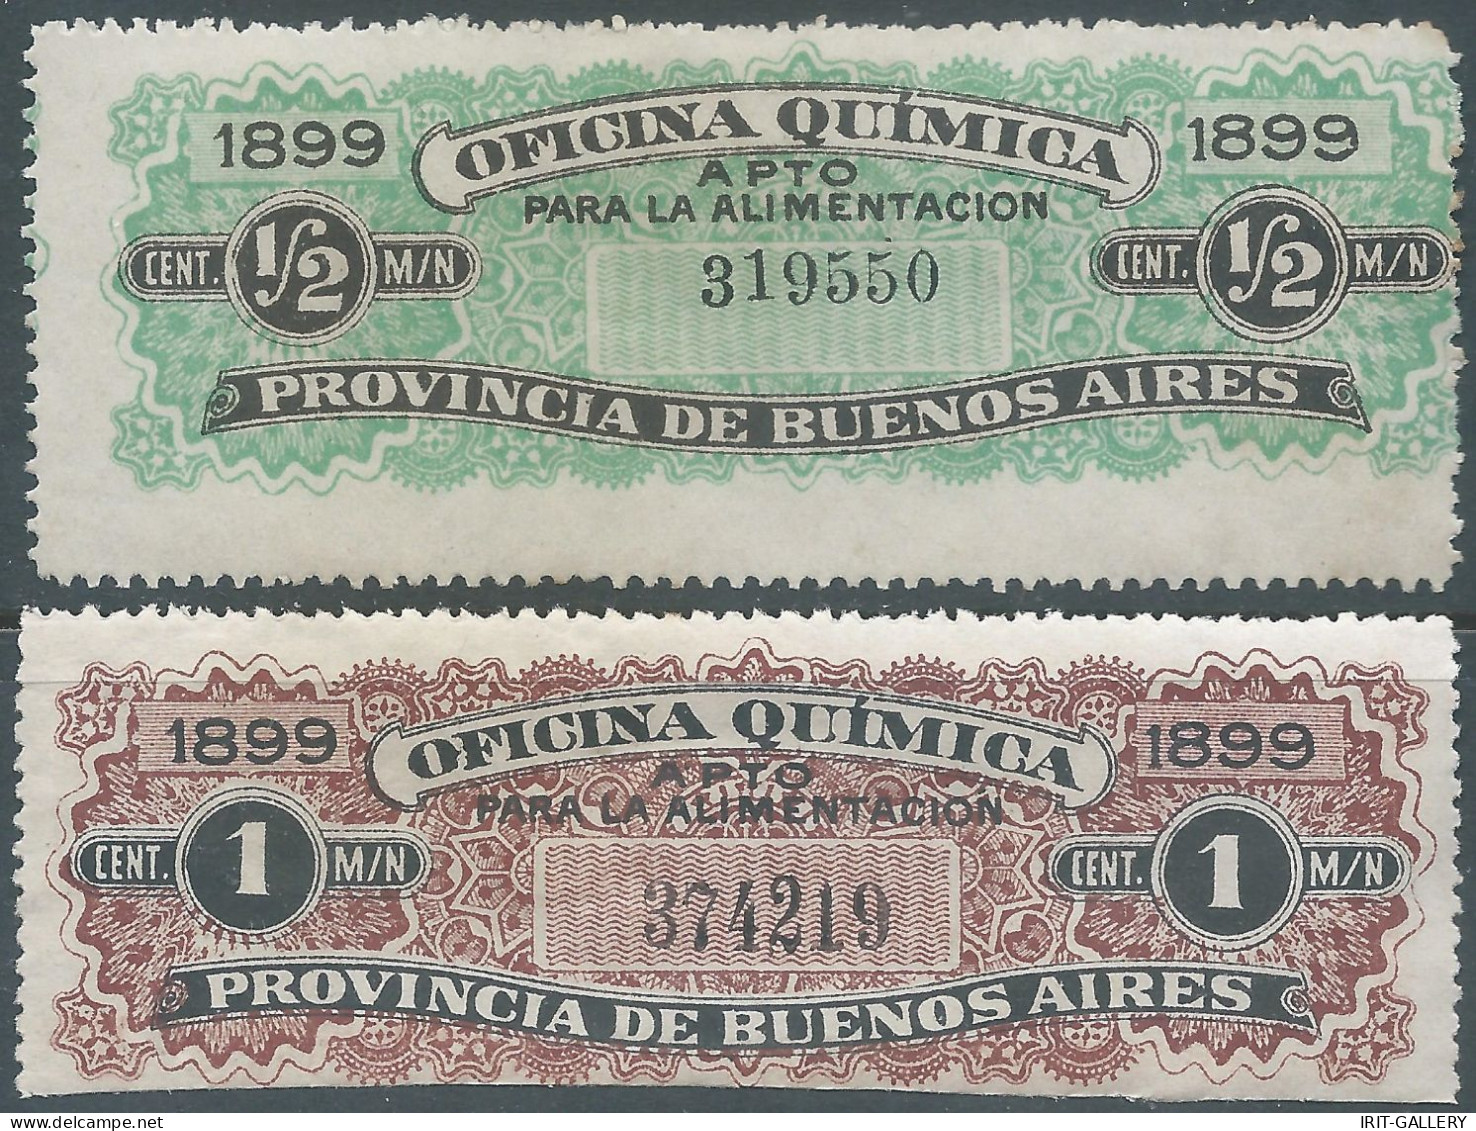 ARGENTINA,1899 Revenue Stamp Tax Fiscal 1/2c & 1c,Oficina Quimica Province Of Buenos Aires,for Feeding,Mint - Service